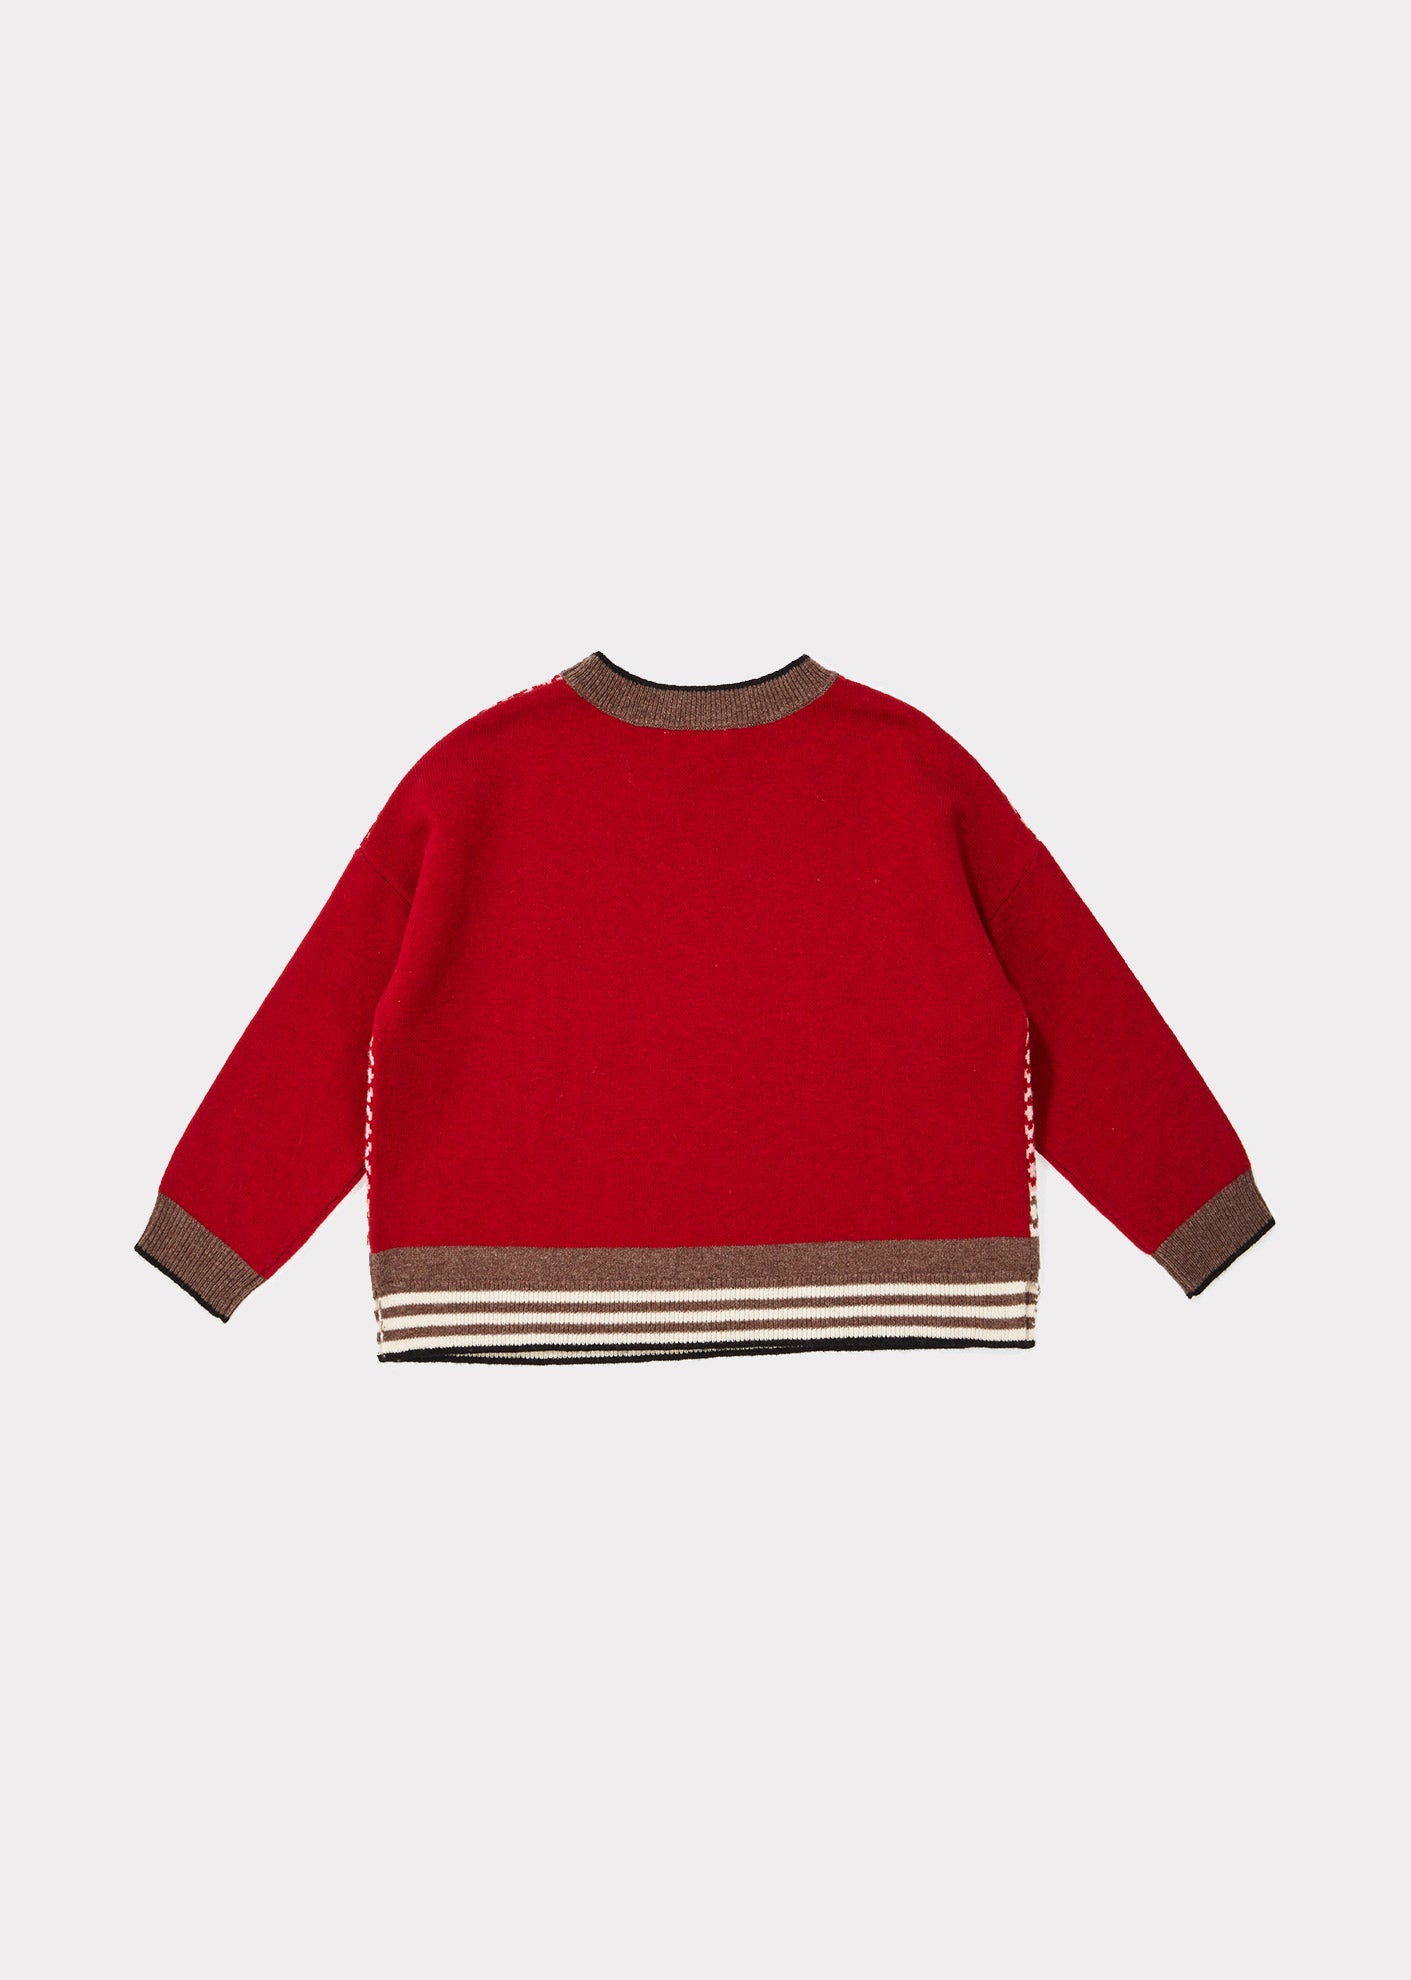 Girls Red Check Wool Sweater